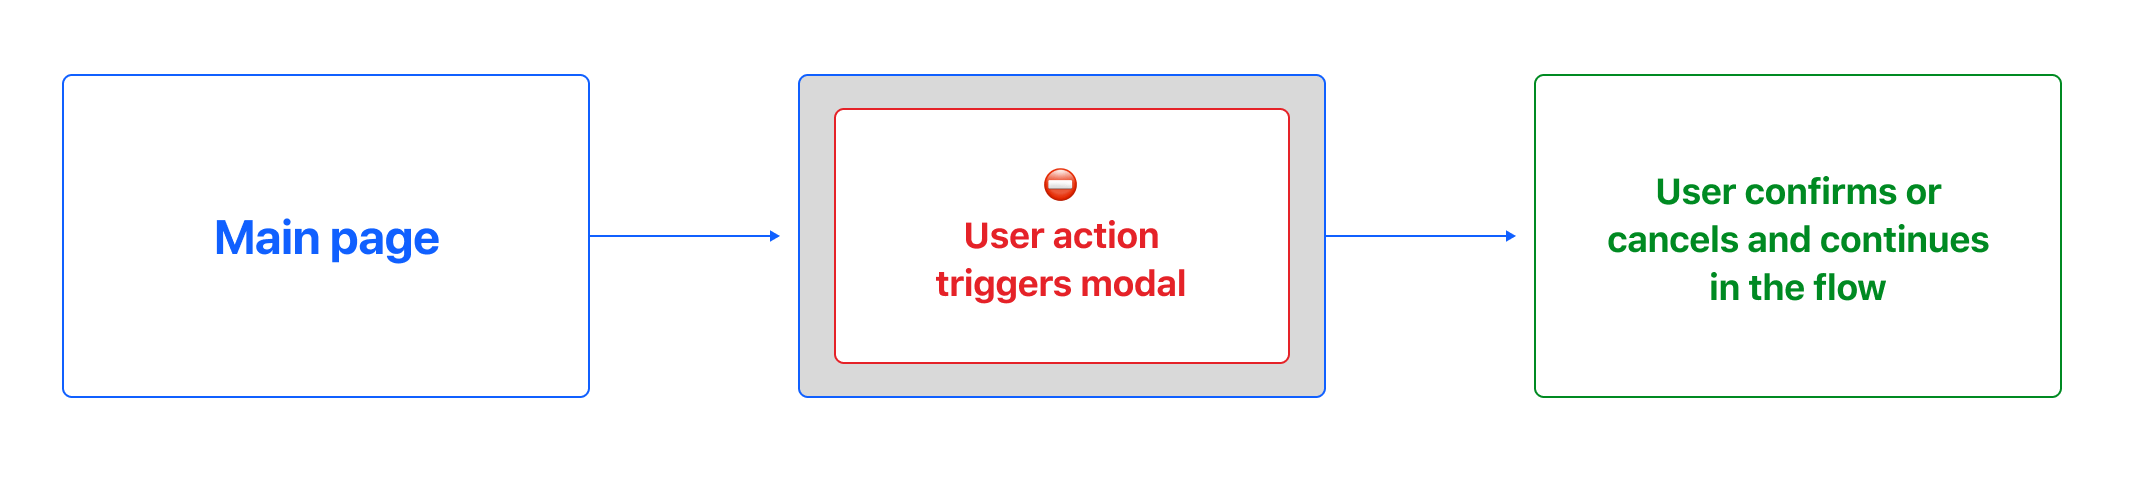 Modal Hierarchy in the user flow